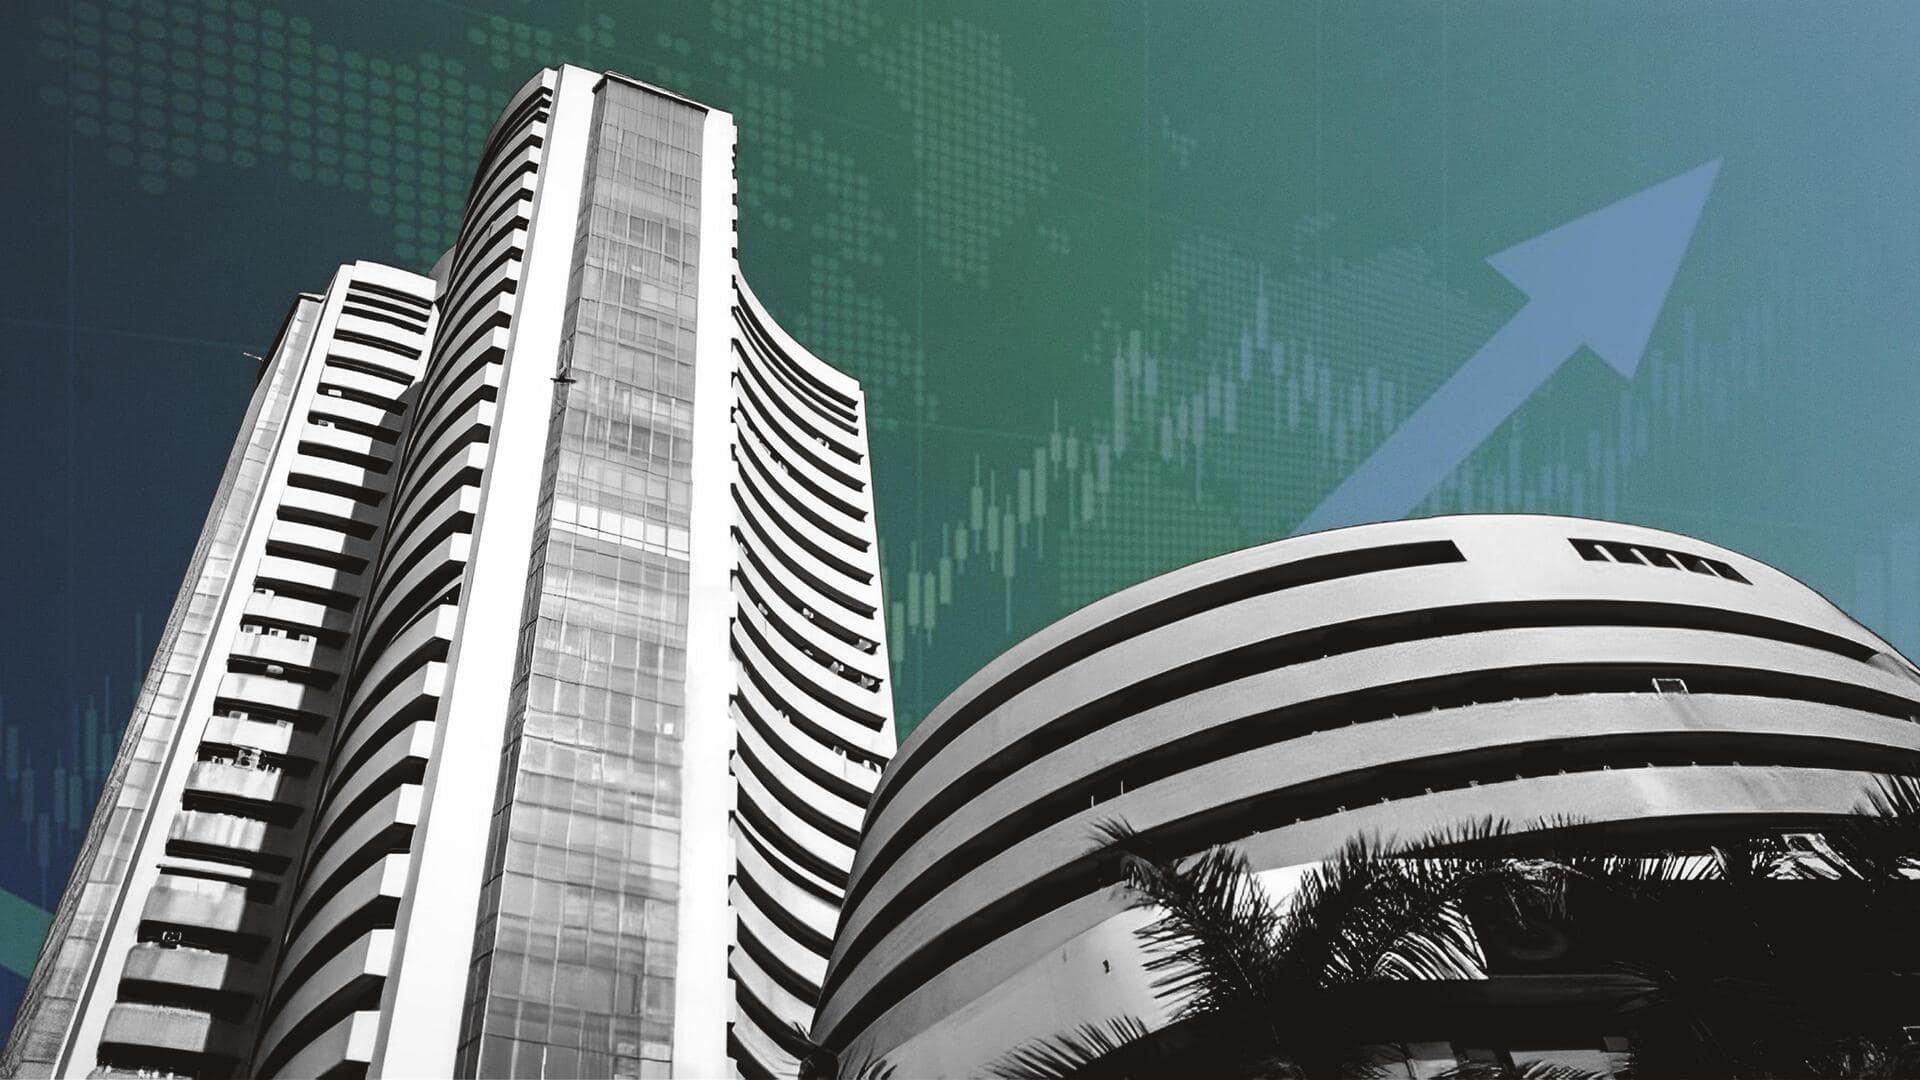 Sensex settles near 73,330 points, Nifty jumps to 22,100